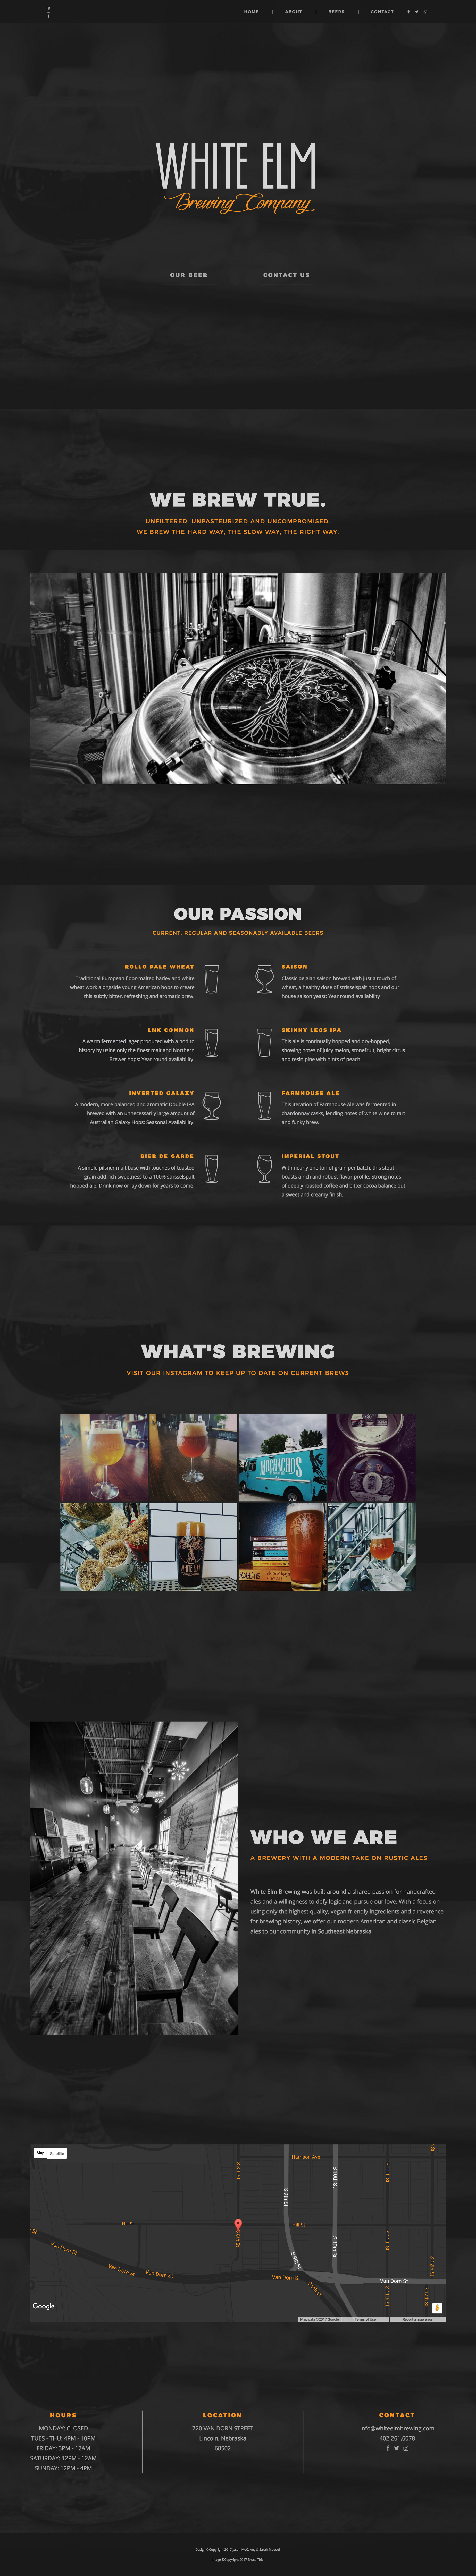 Full View of While Elm Brewing Website